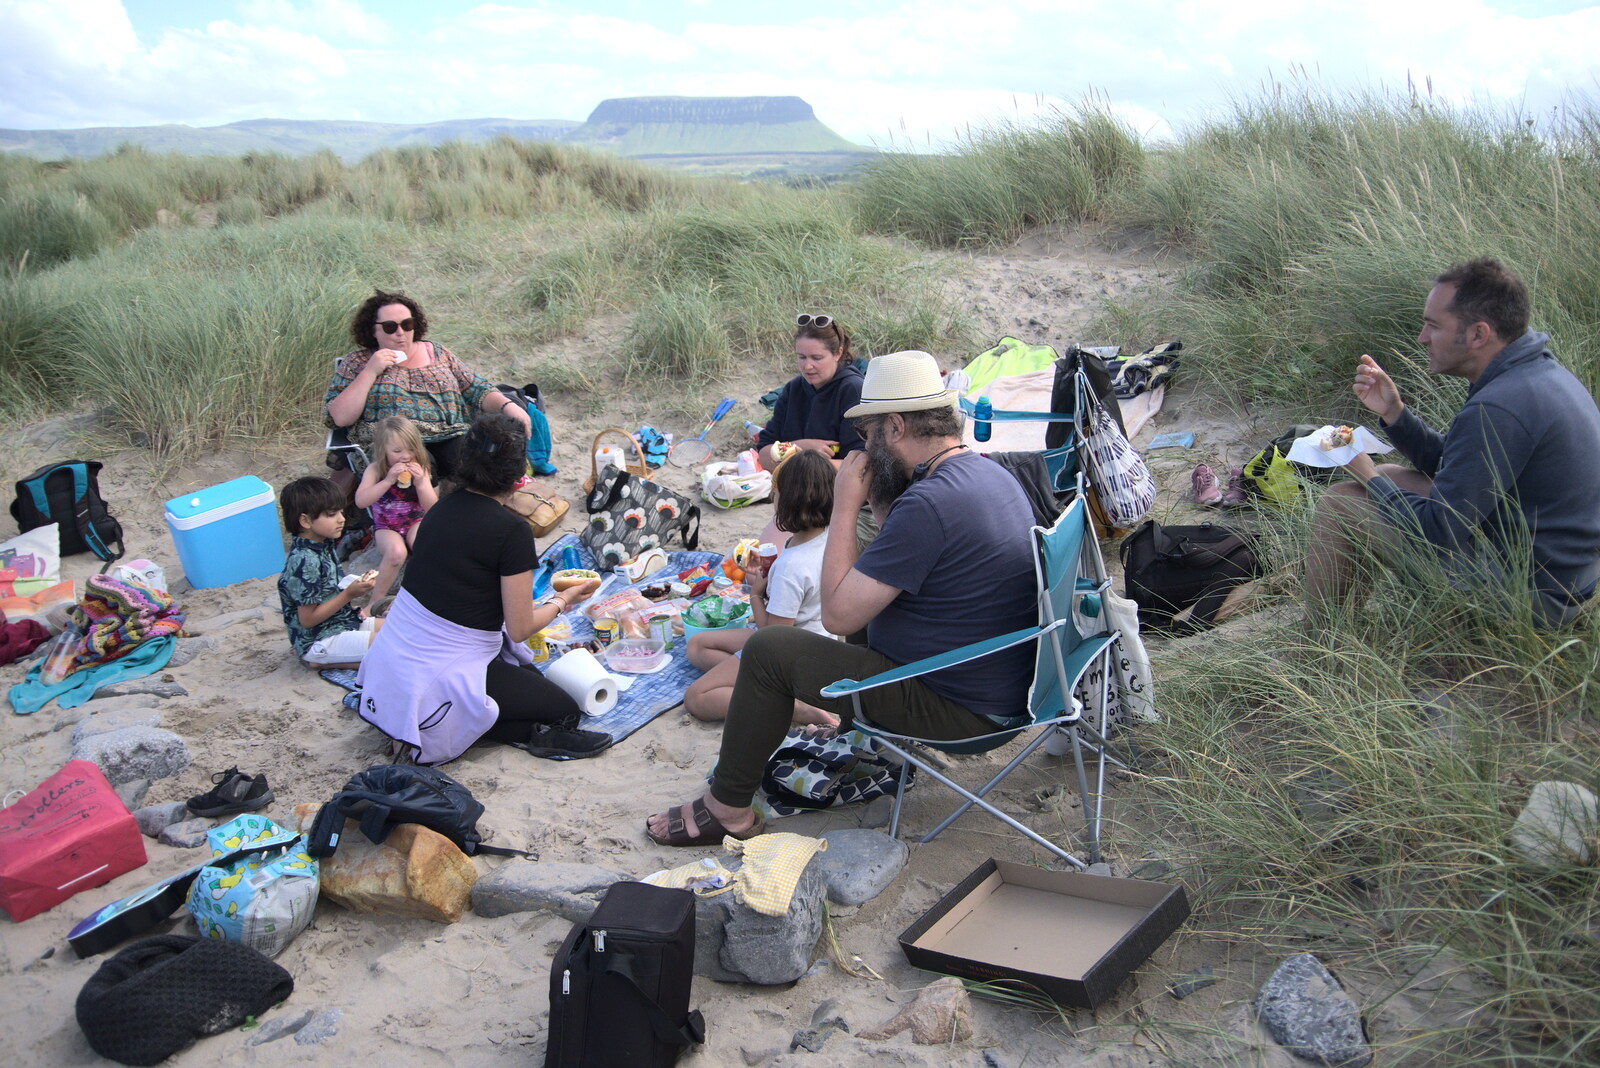 A Trip to Manorhamilton, County Leitrim, Ireland - 11th August 2021: Another massed picnic on the beach